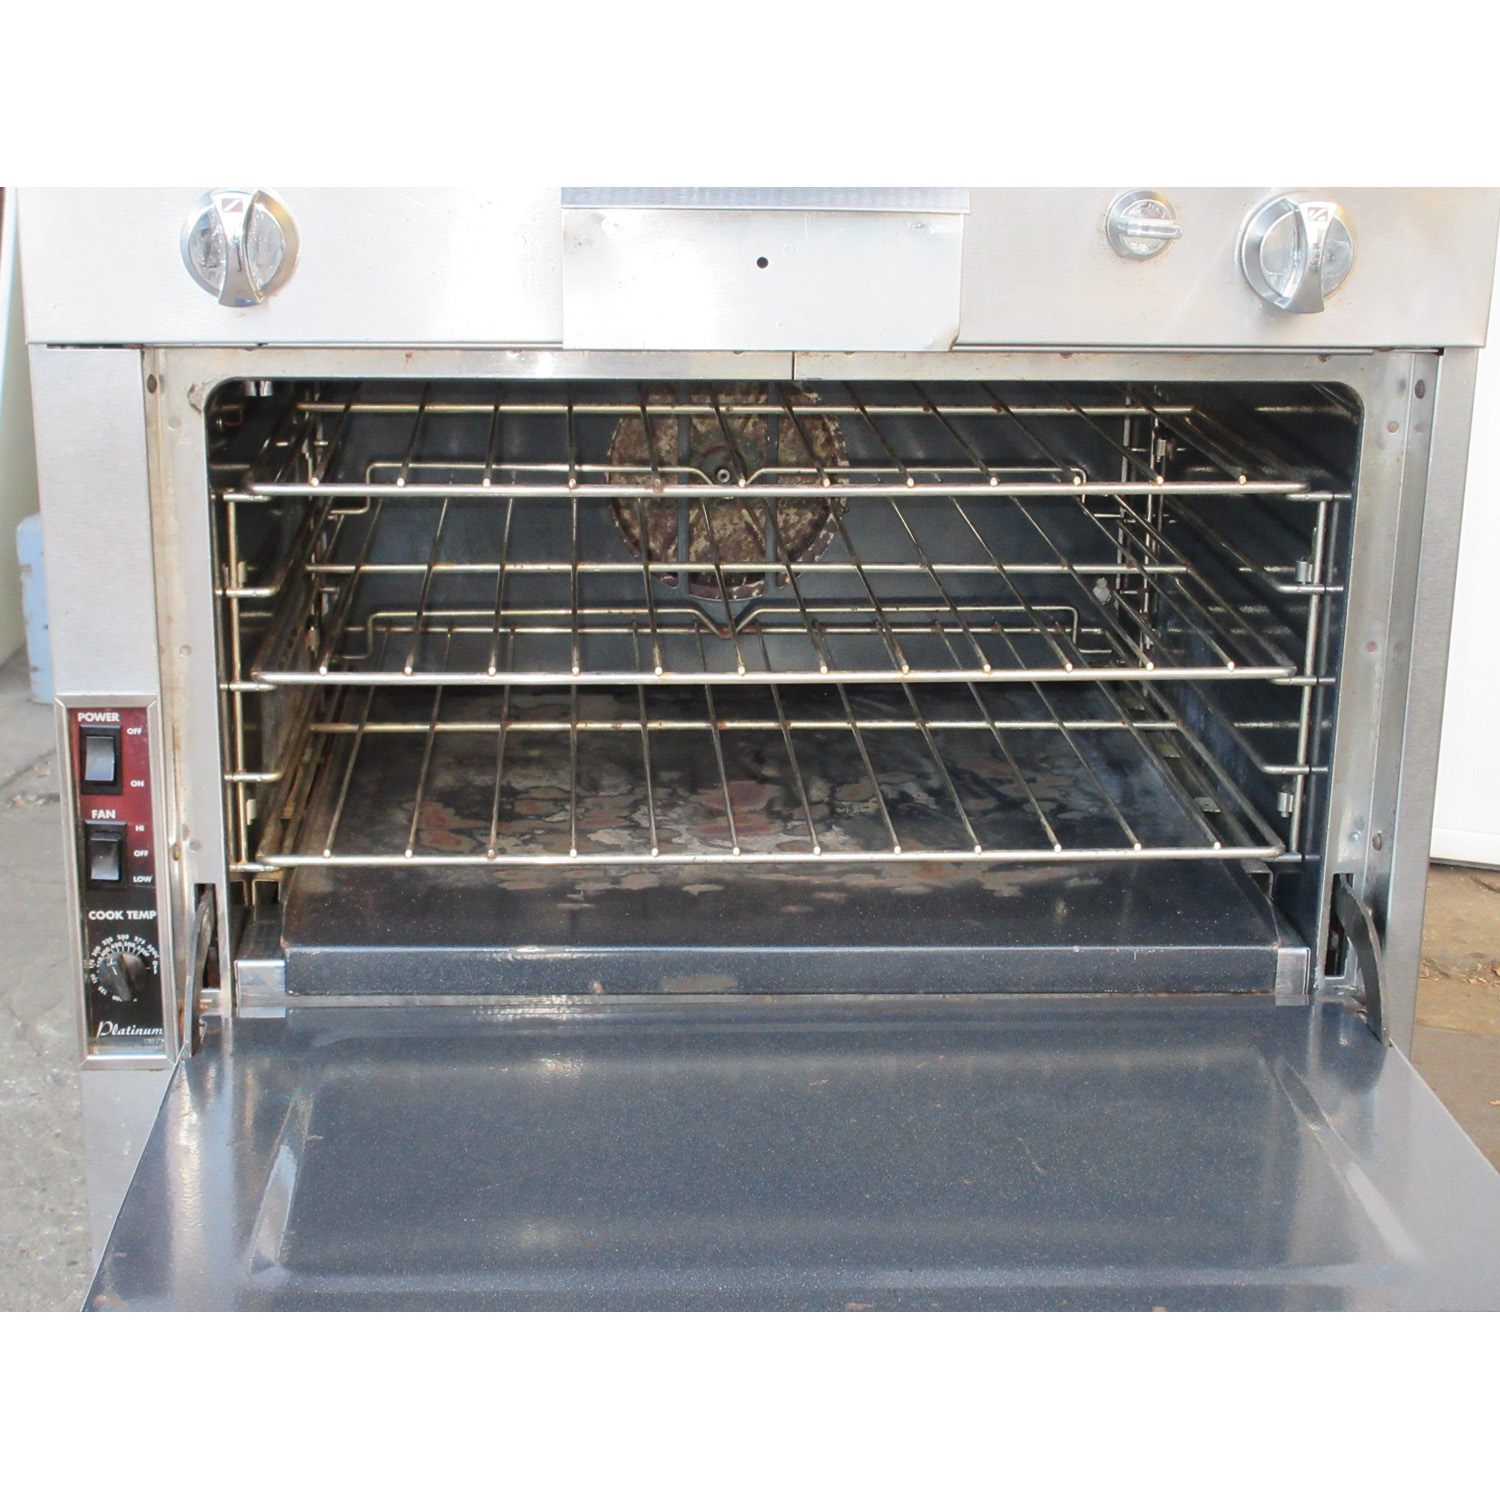 Southbend P32A-3240 Broiler with Convection Oven, Gas, Used Excellent Condition image 4